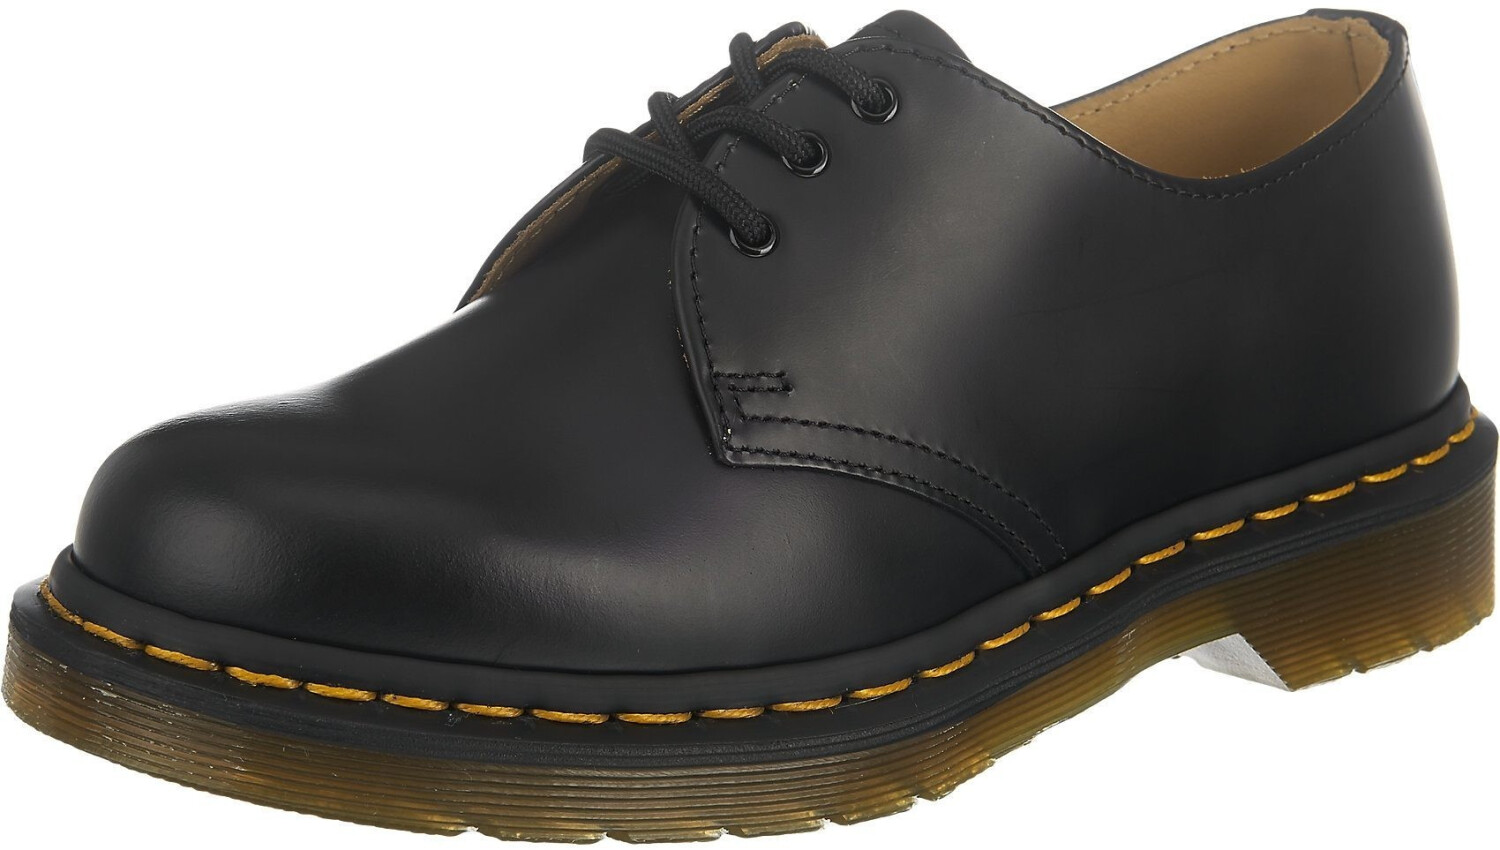 Buy Dr. Martens 1461 from £69.99 (Today) – Best Deals on idealo.co.uk